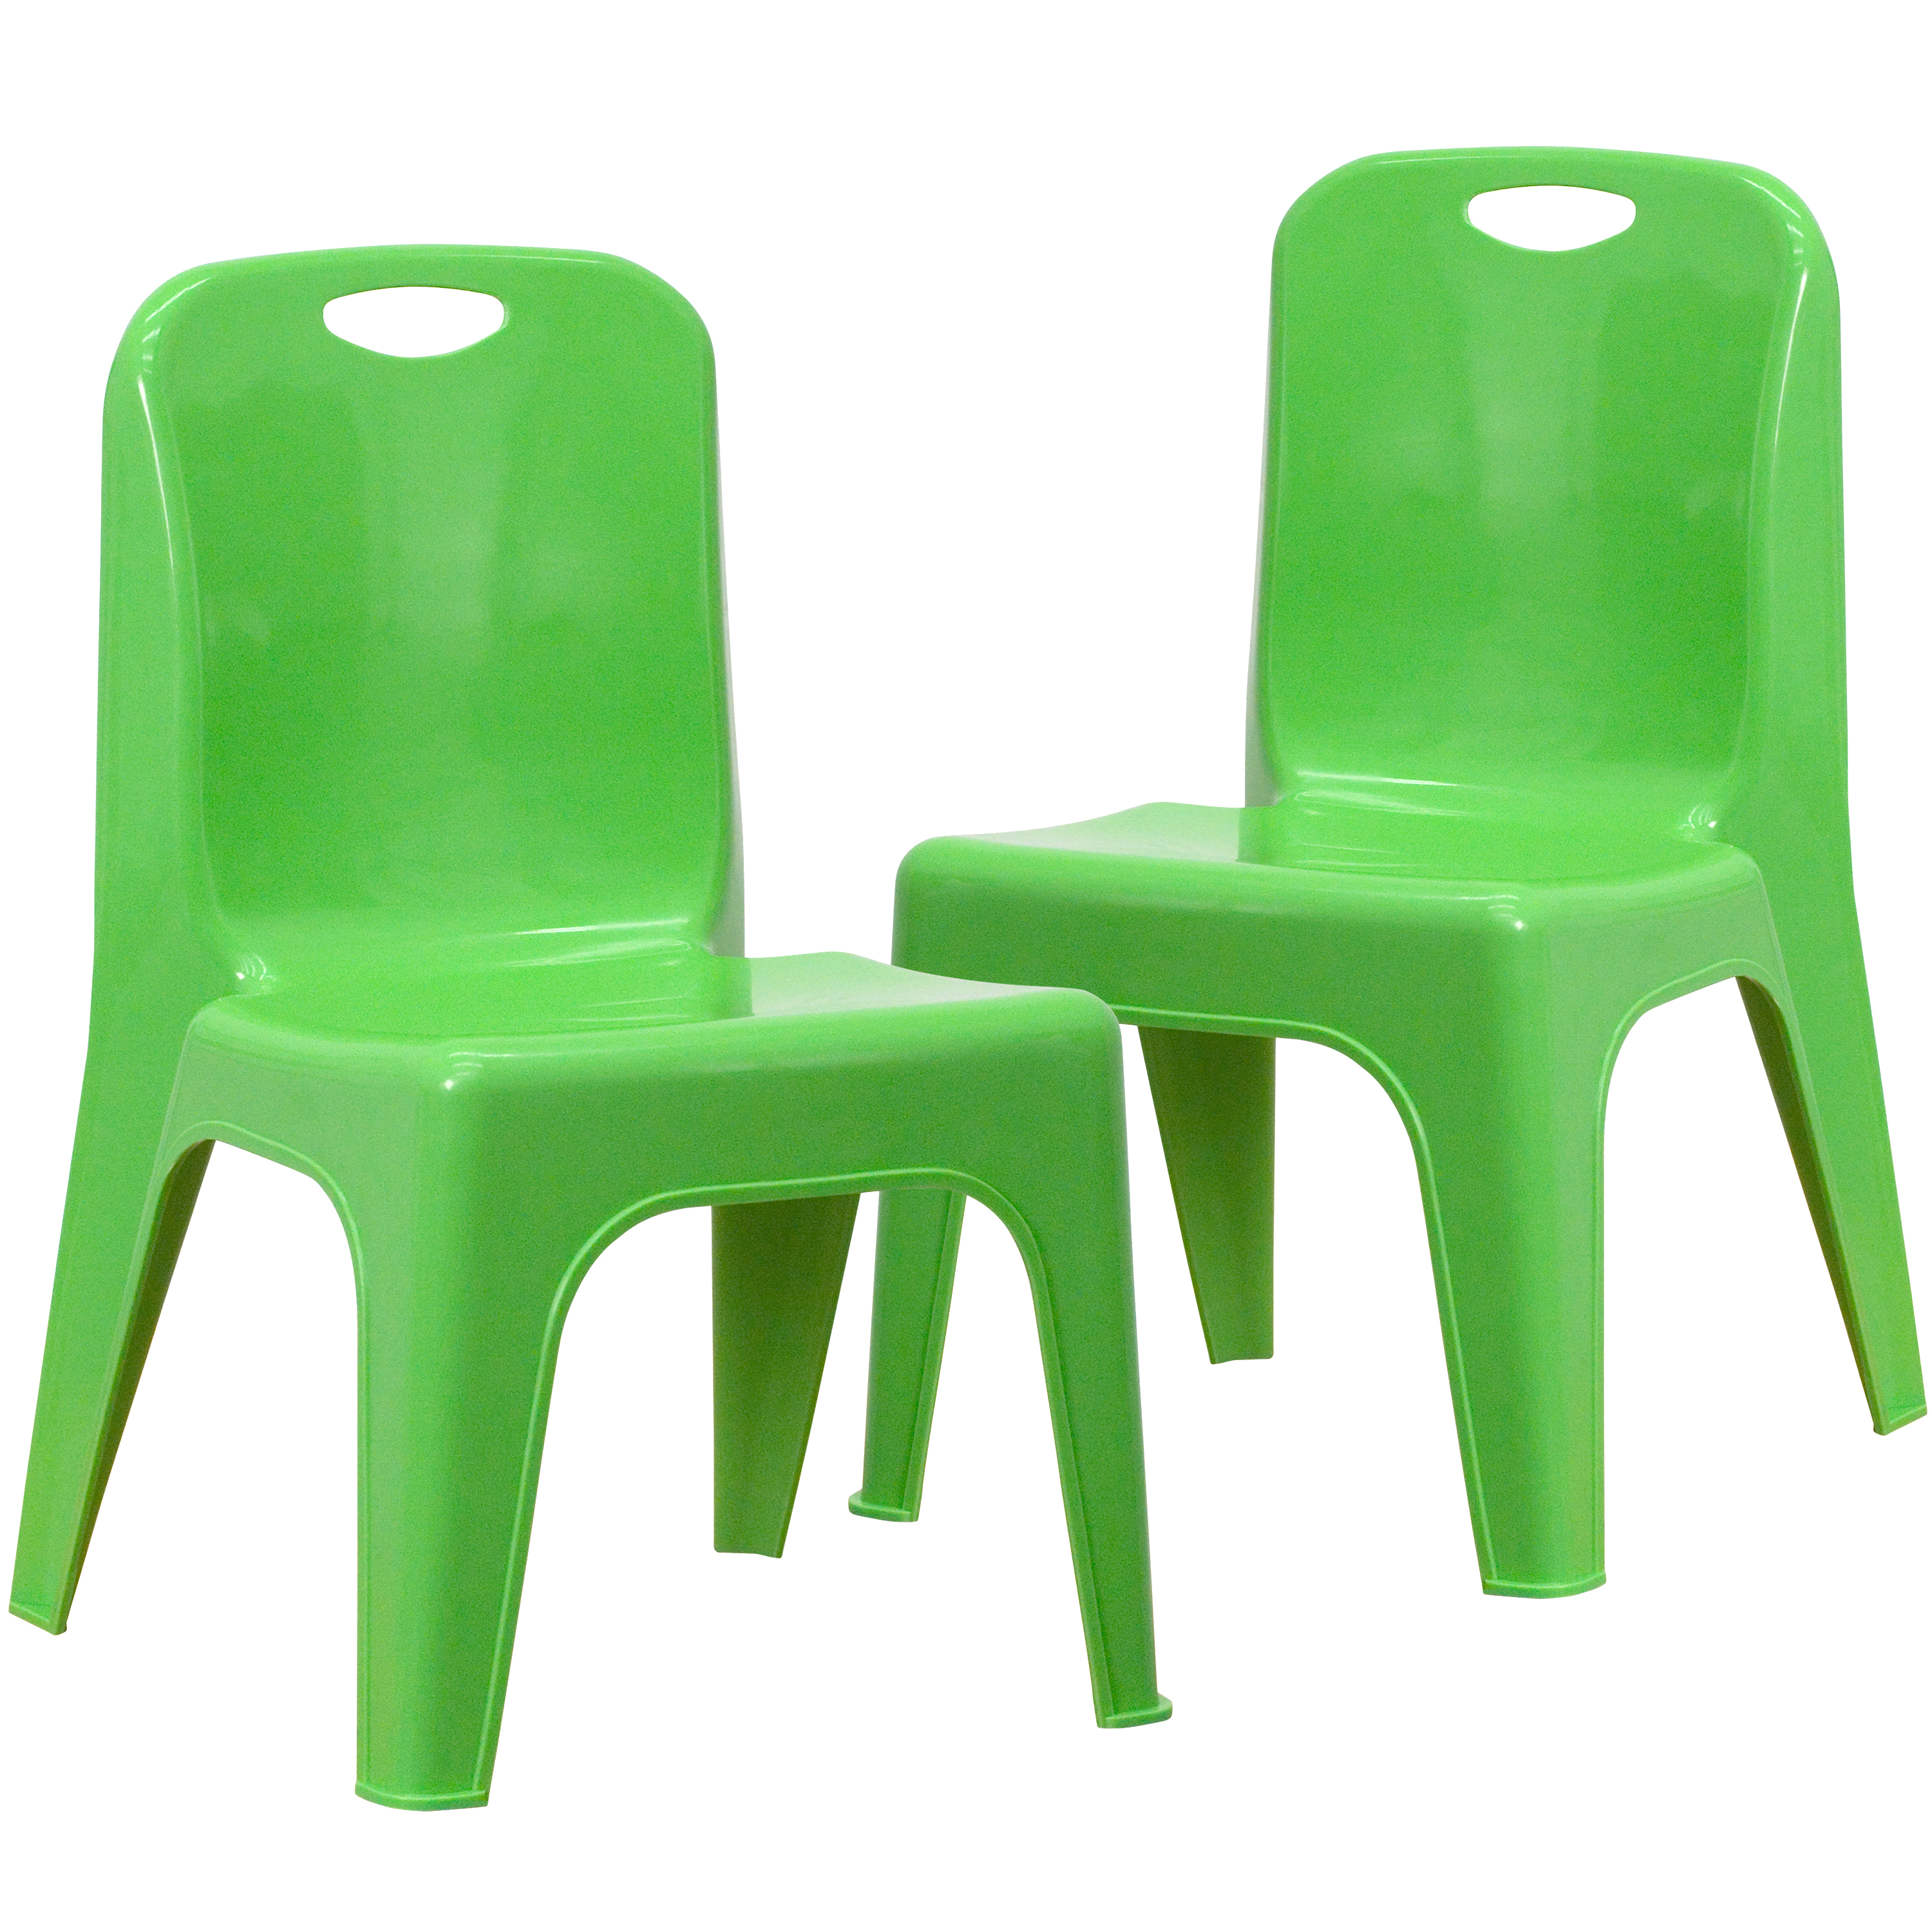 Flash Furniture 2-YU-YCX-011-GREEN-GG Green Plastic Stackable School Chair with Carry Handle and 11" Seat Height, 2 Pack